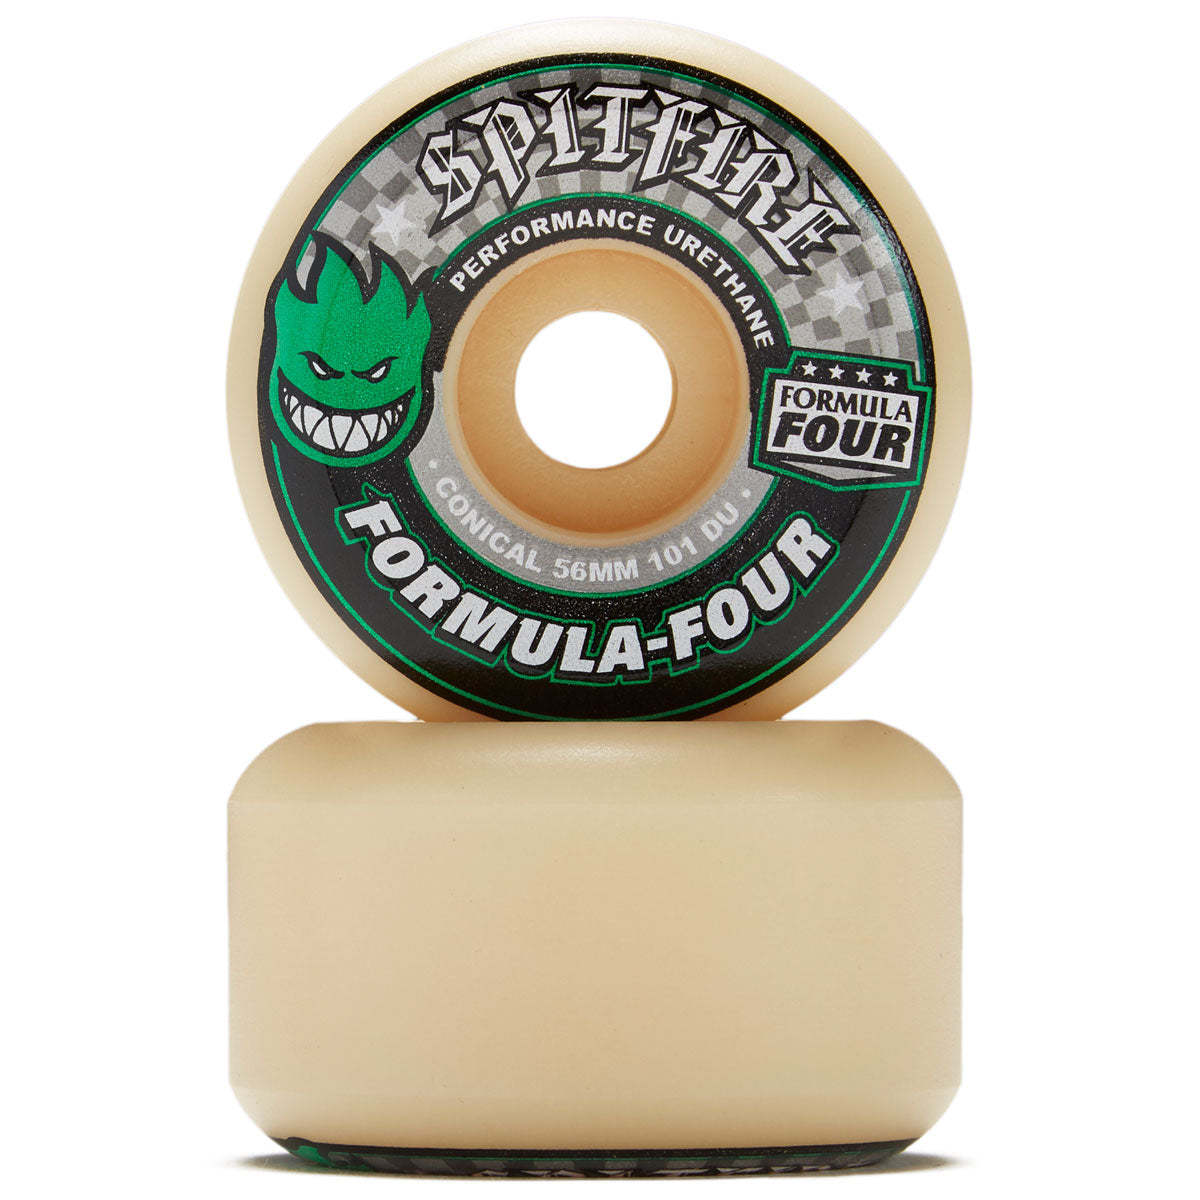 Spitfire F4 Conical 101a Skateboard Wheels - Green - 56mm image 2